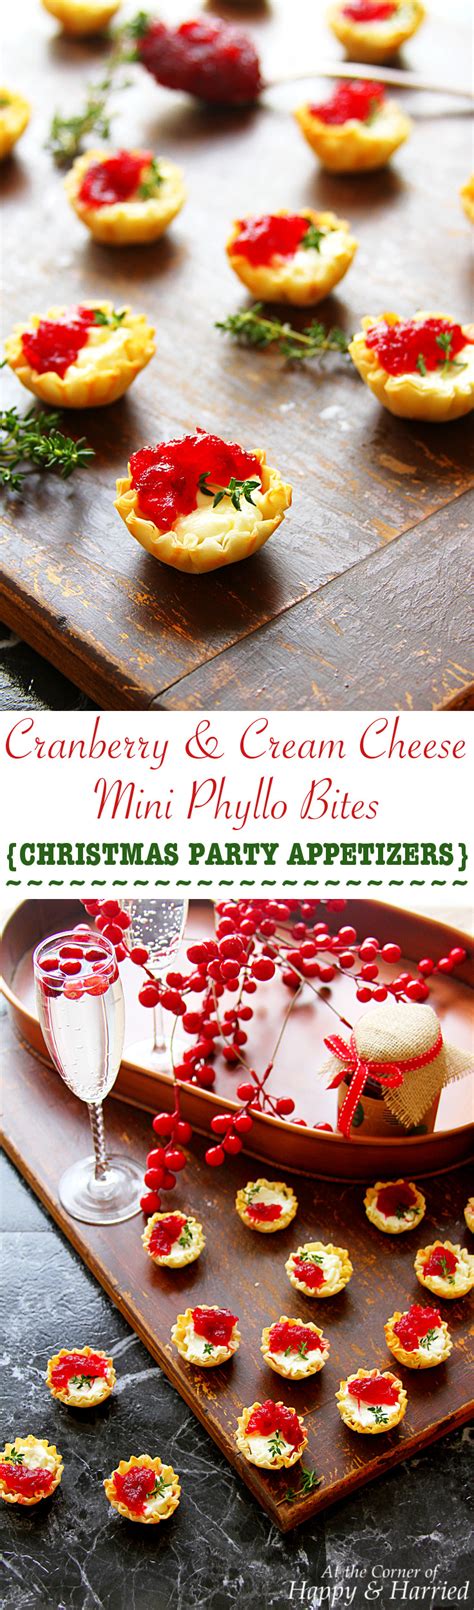 Only 5 minutes to make this beautiful appetizer! Cranberry & Cream Cheese Mini Phyllo Bites {Christmas Party Appetizers}